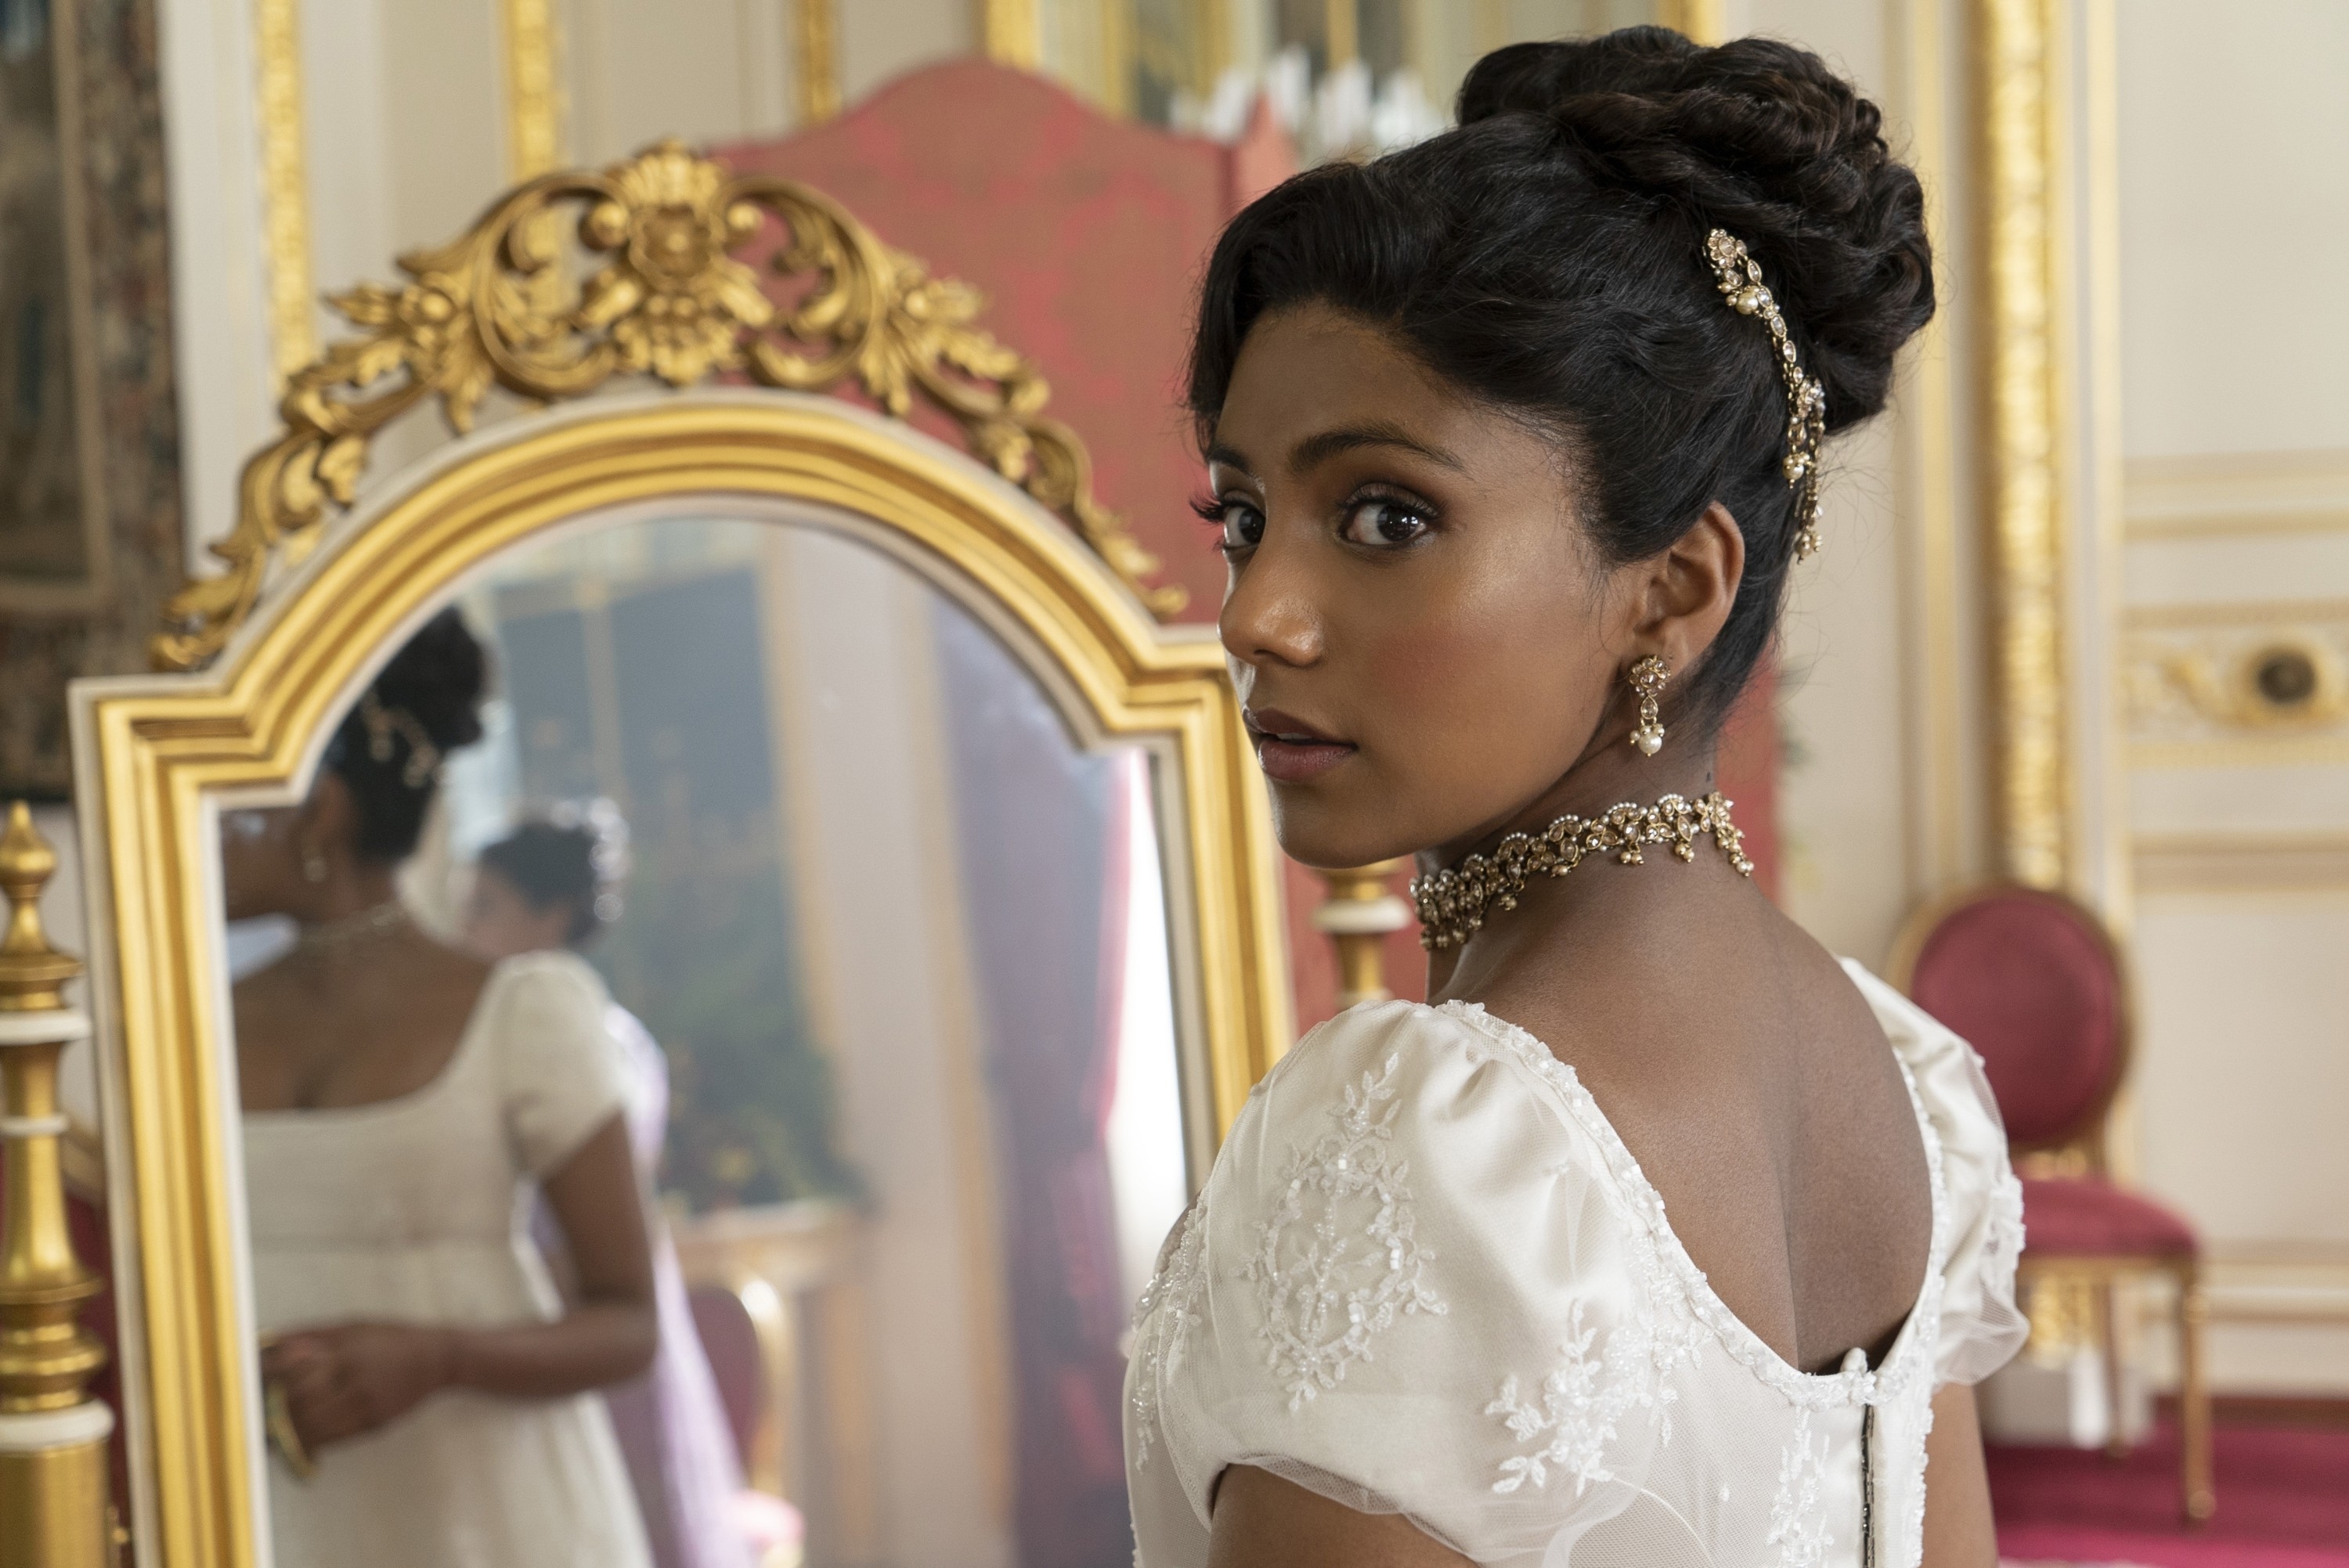 Character in a period drama attire glancing at a mirror, with ornate details and an elegant updo hairstyle